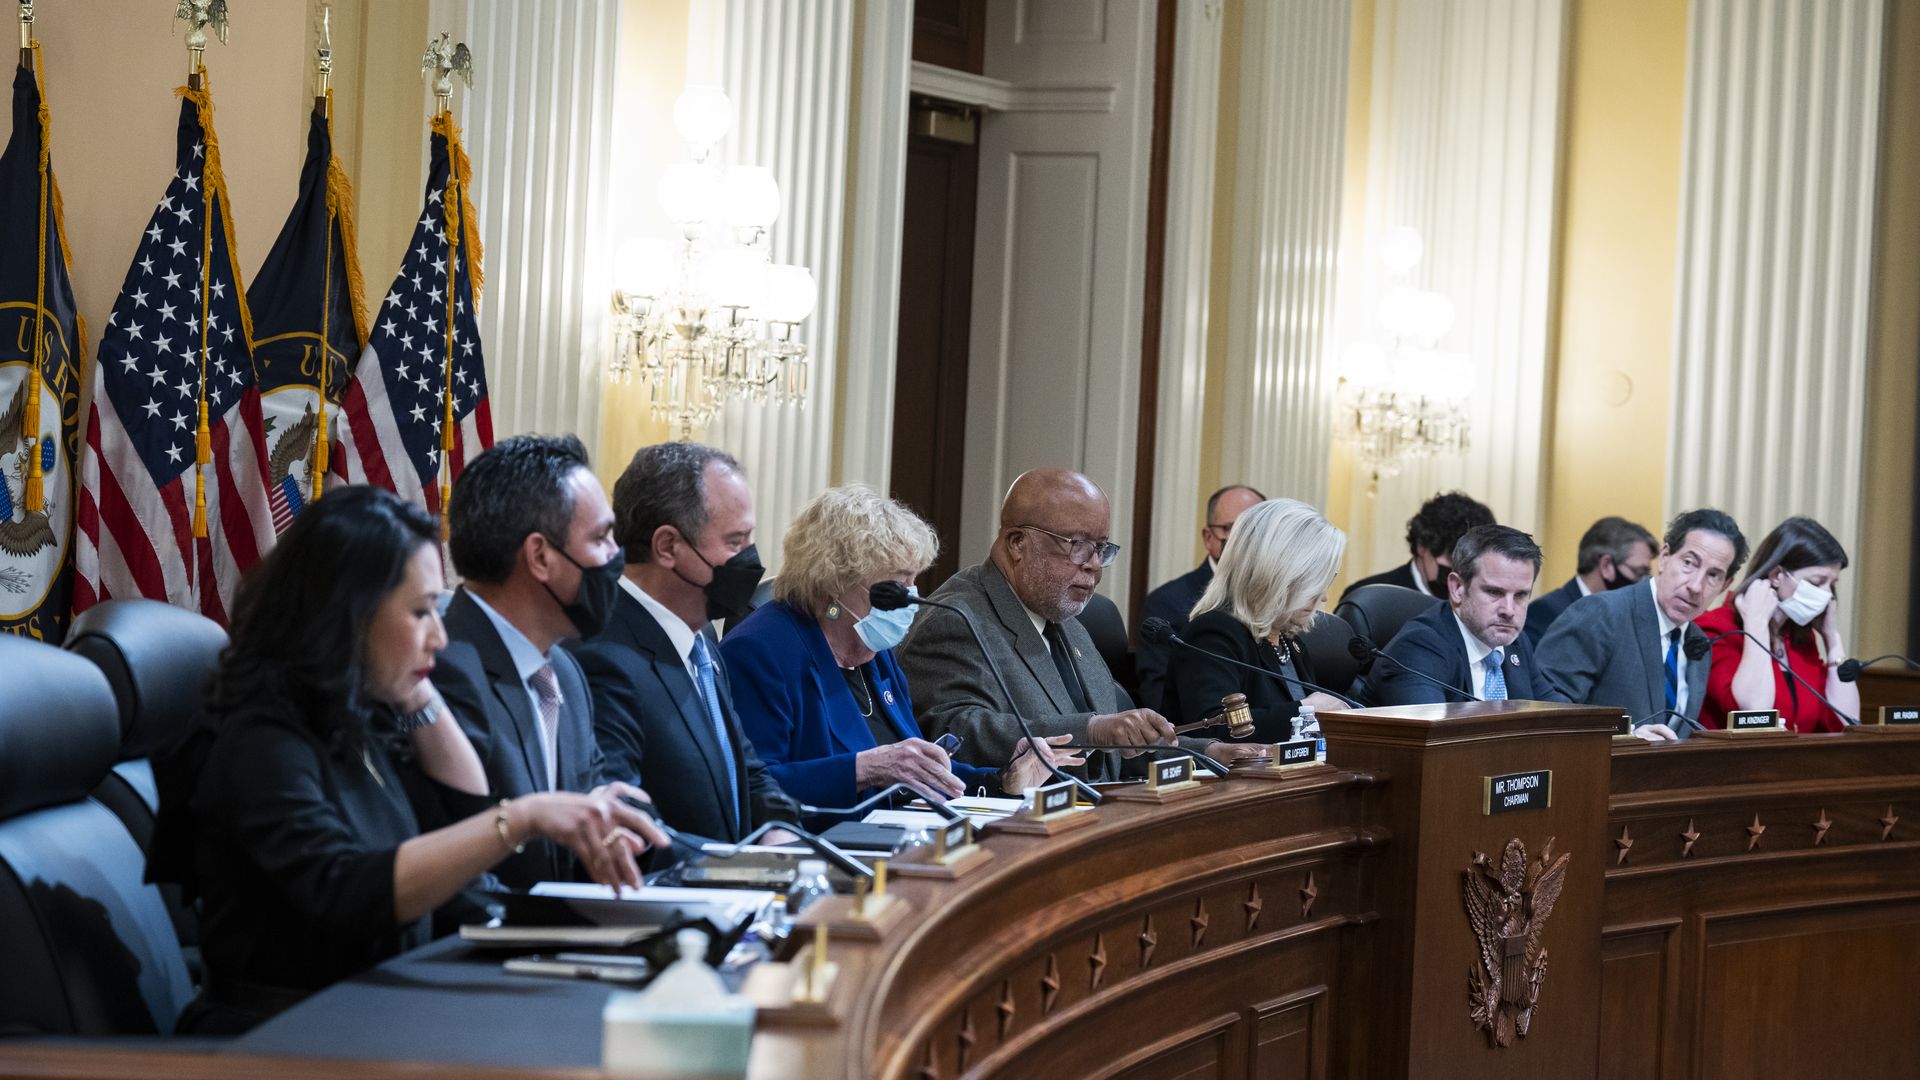 The January 6 Select Committee is seen during a meeting.